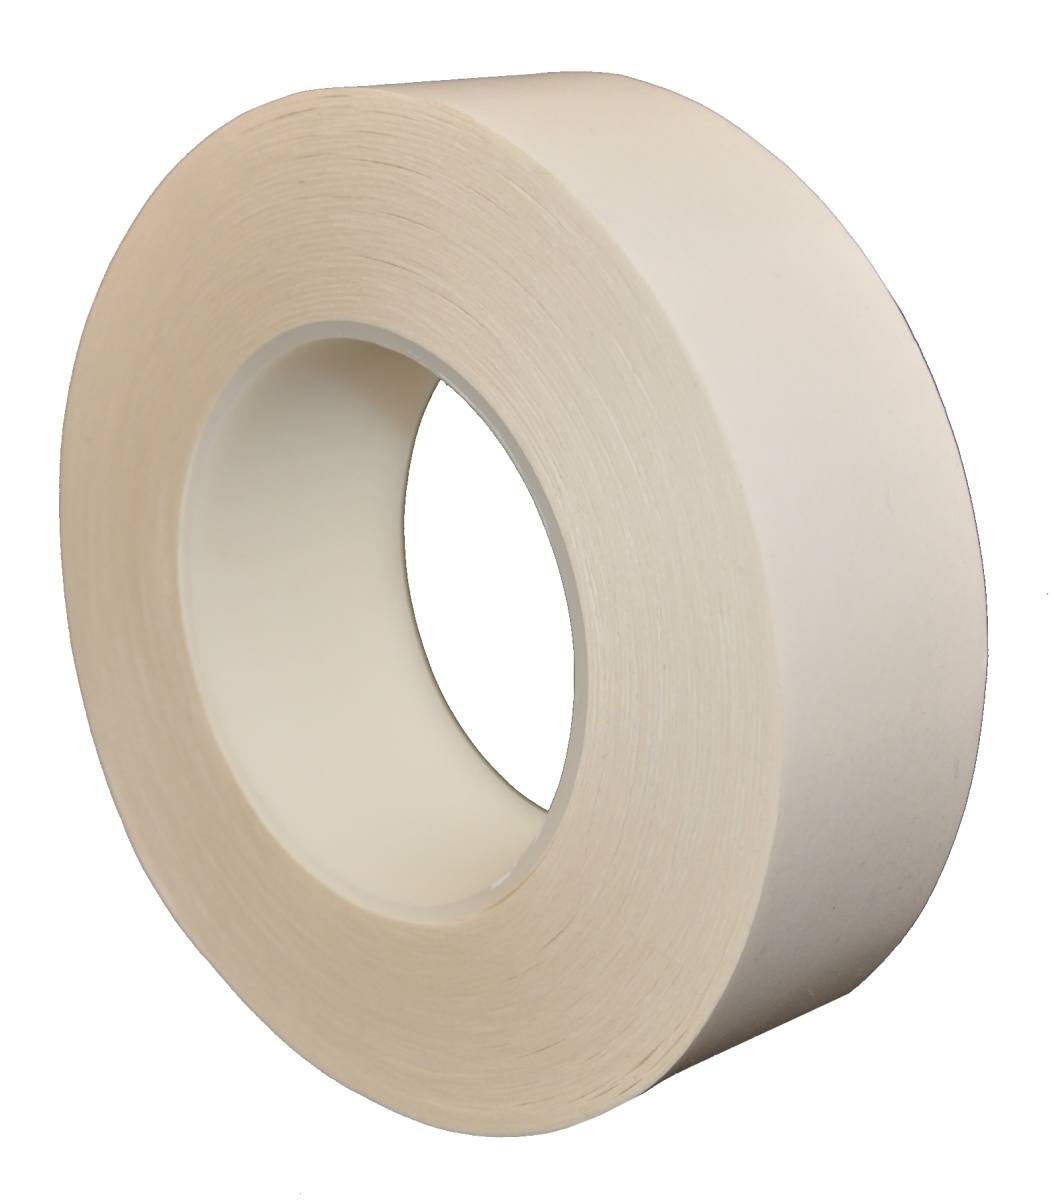 SKS silicone paper release liner, 350mmx150m, coated with glassine on both sides, white